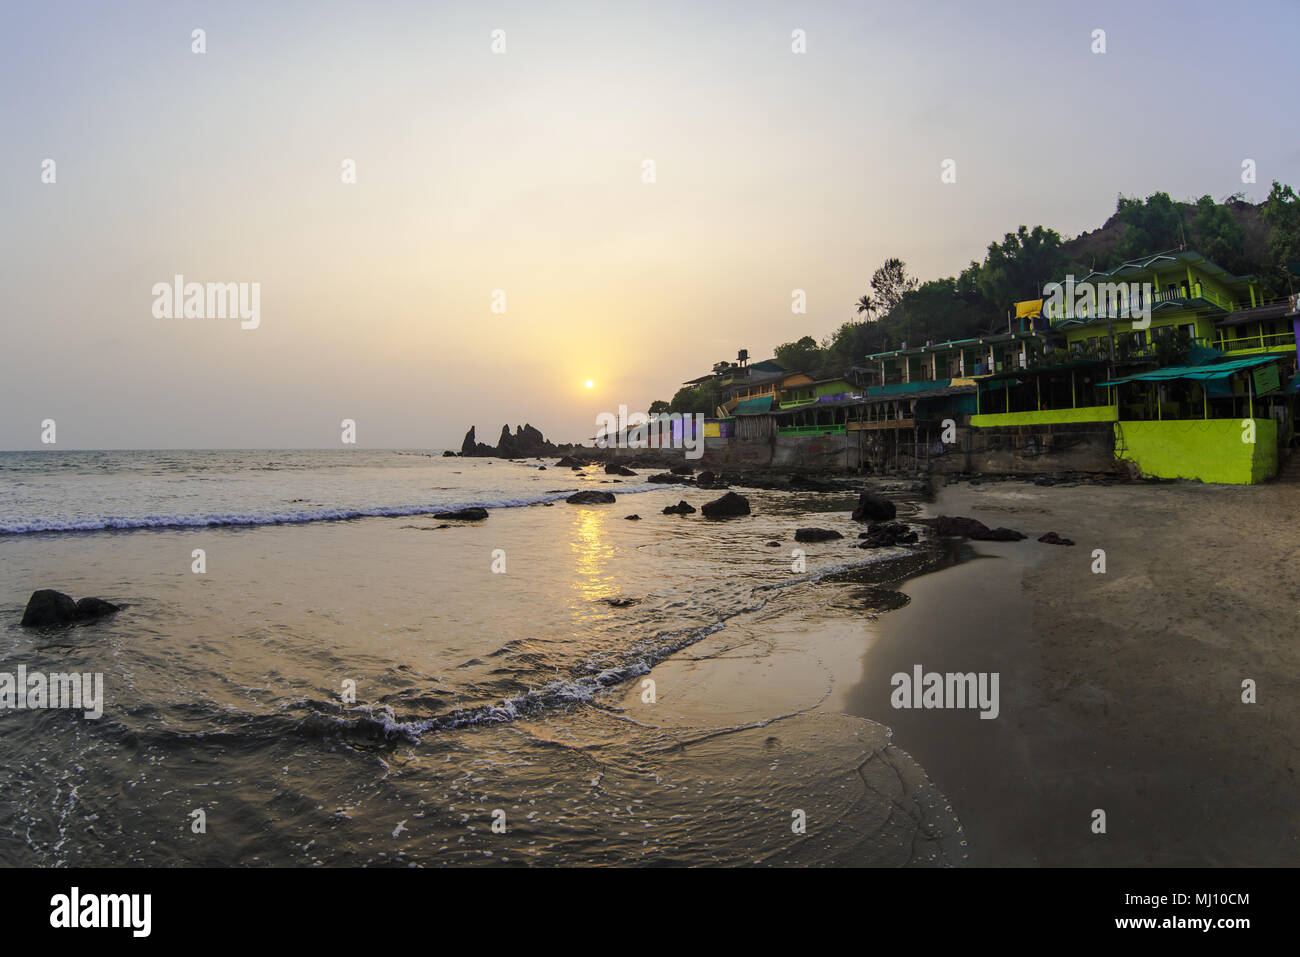 Cafe on tropical rocky beach at sunset Stock Photo